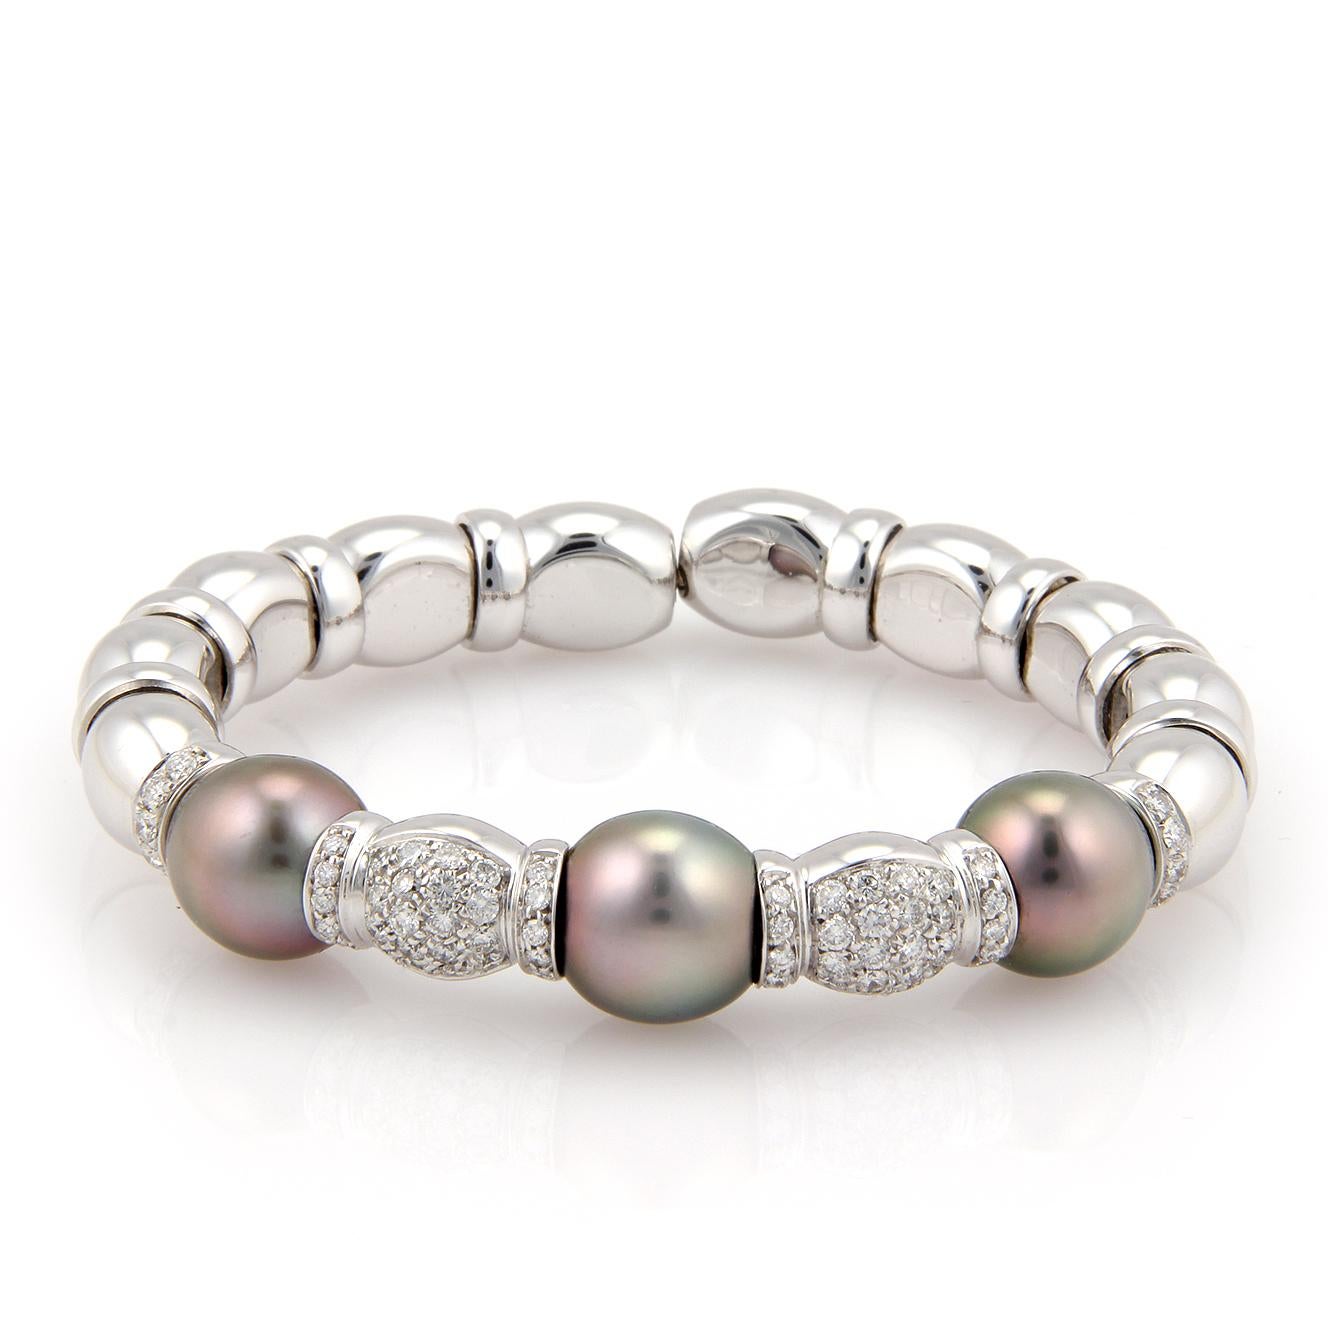 This is a stunning Estate bracelet, it is well crafted from 18k white gold with a high polished finish. It features a flex style cuff bracelet with long beaded design and ring links, the front of the band has two part bead with ring links adorned